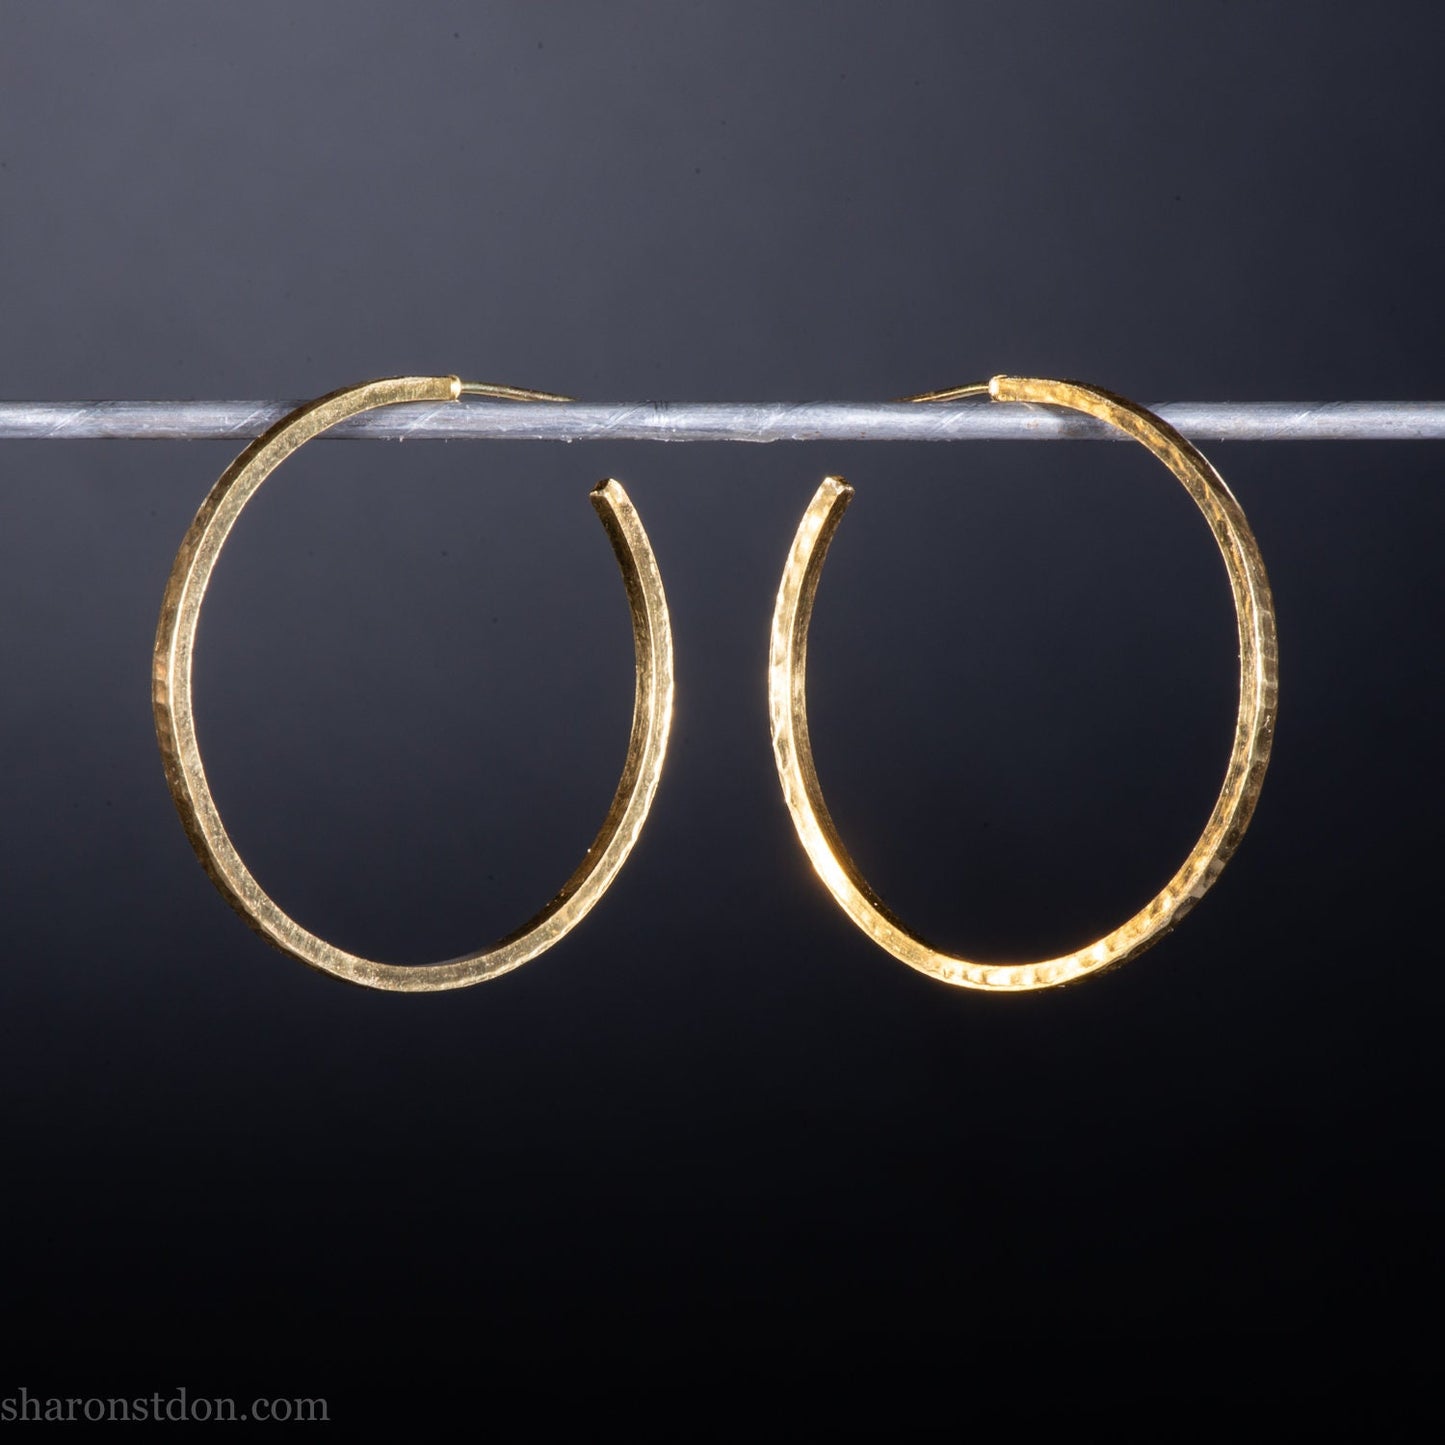 30mm diameter by 1.5mm thick handmade solid 14k yellow gold hoop earrings. Handmade by Sharon SaintDon in North America. Hammered from solid gold with a matte finish.